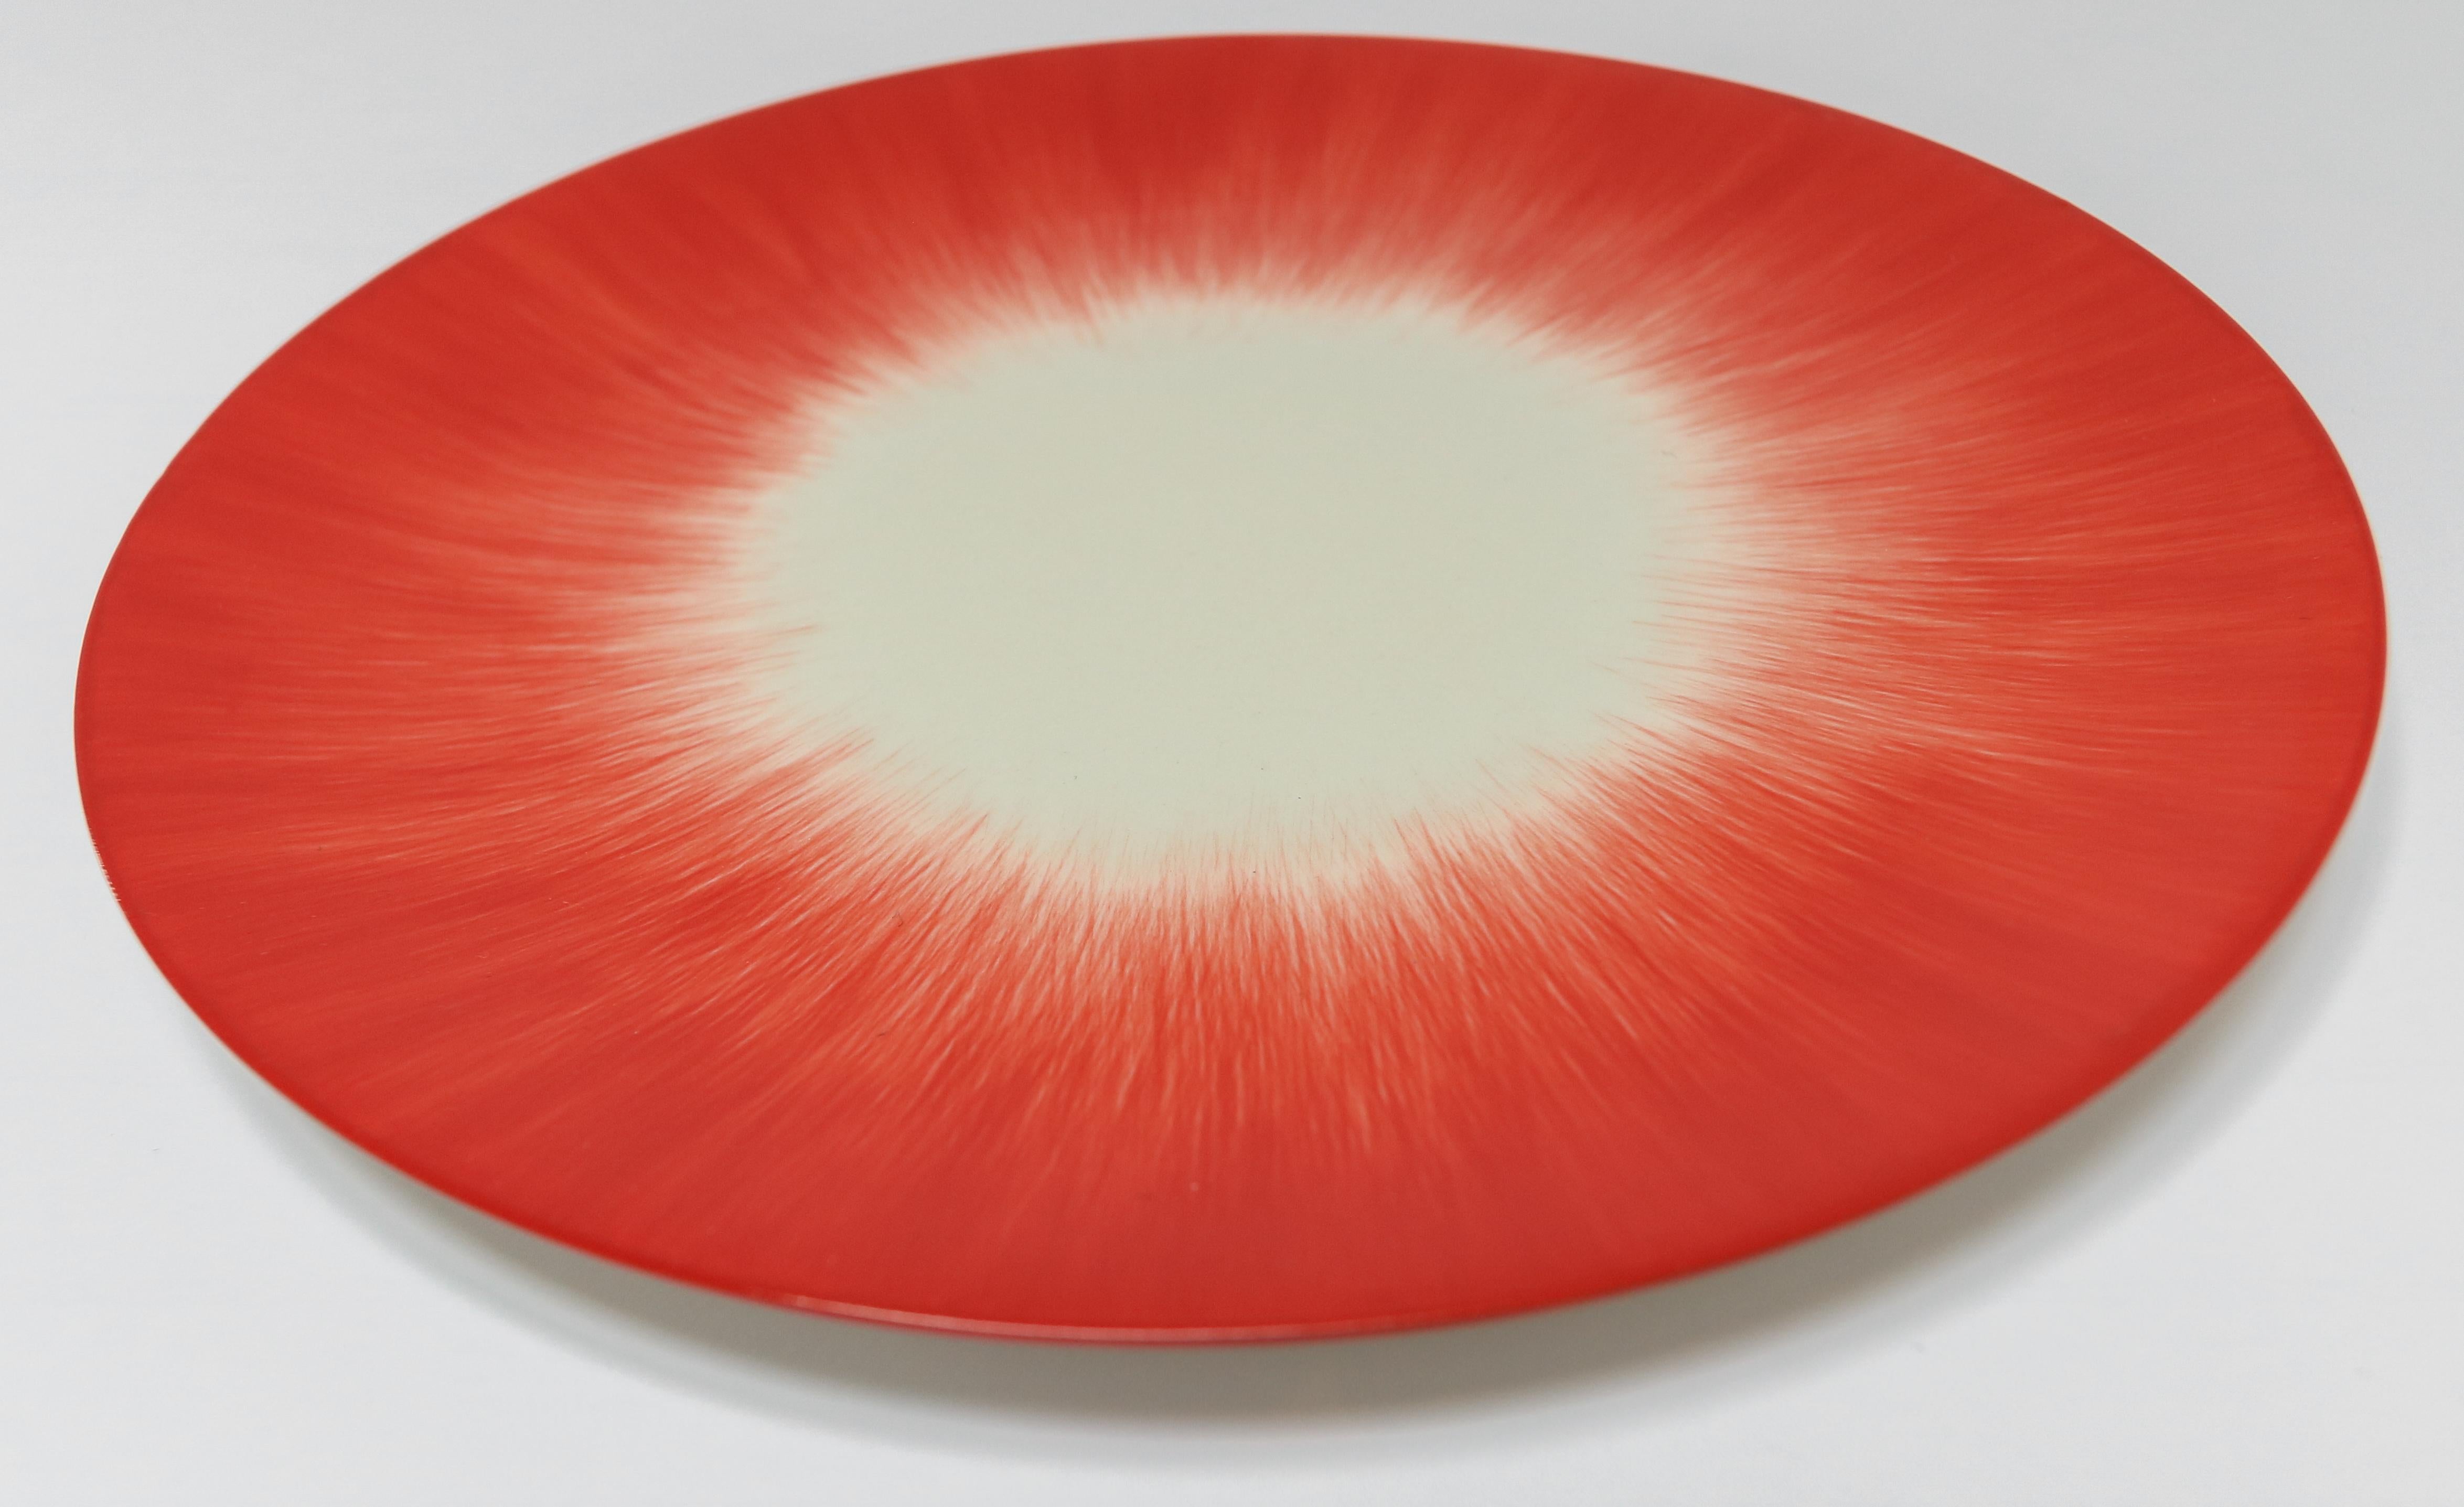 Ann Demeulemeester for Serax Dé dessert plate in Off White / Red. Hand painted with a starburst pattern. 17.5cm diameter x 0.9 cm high. Must be purchased in quantities of two.